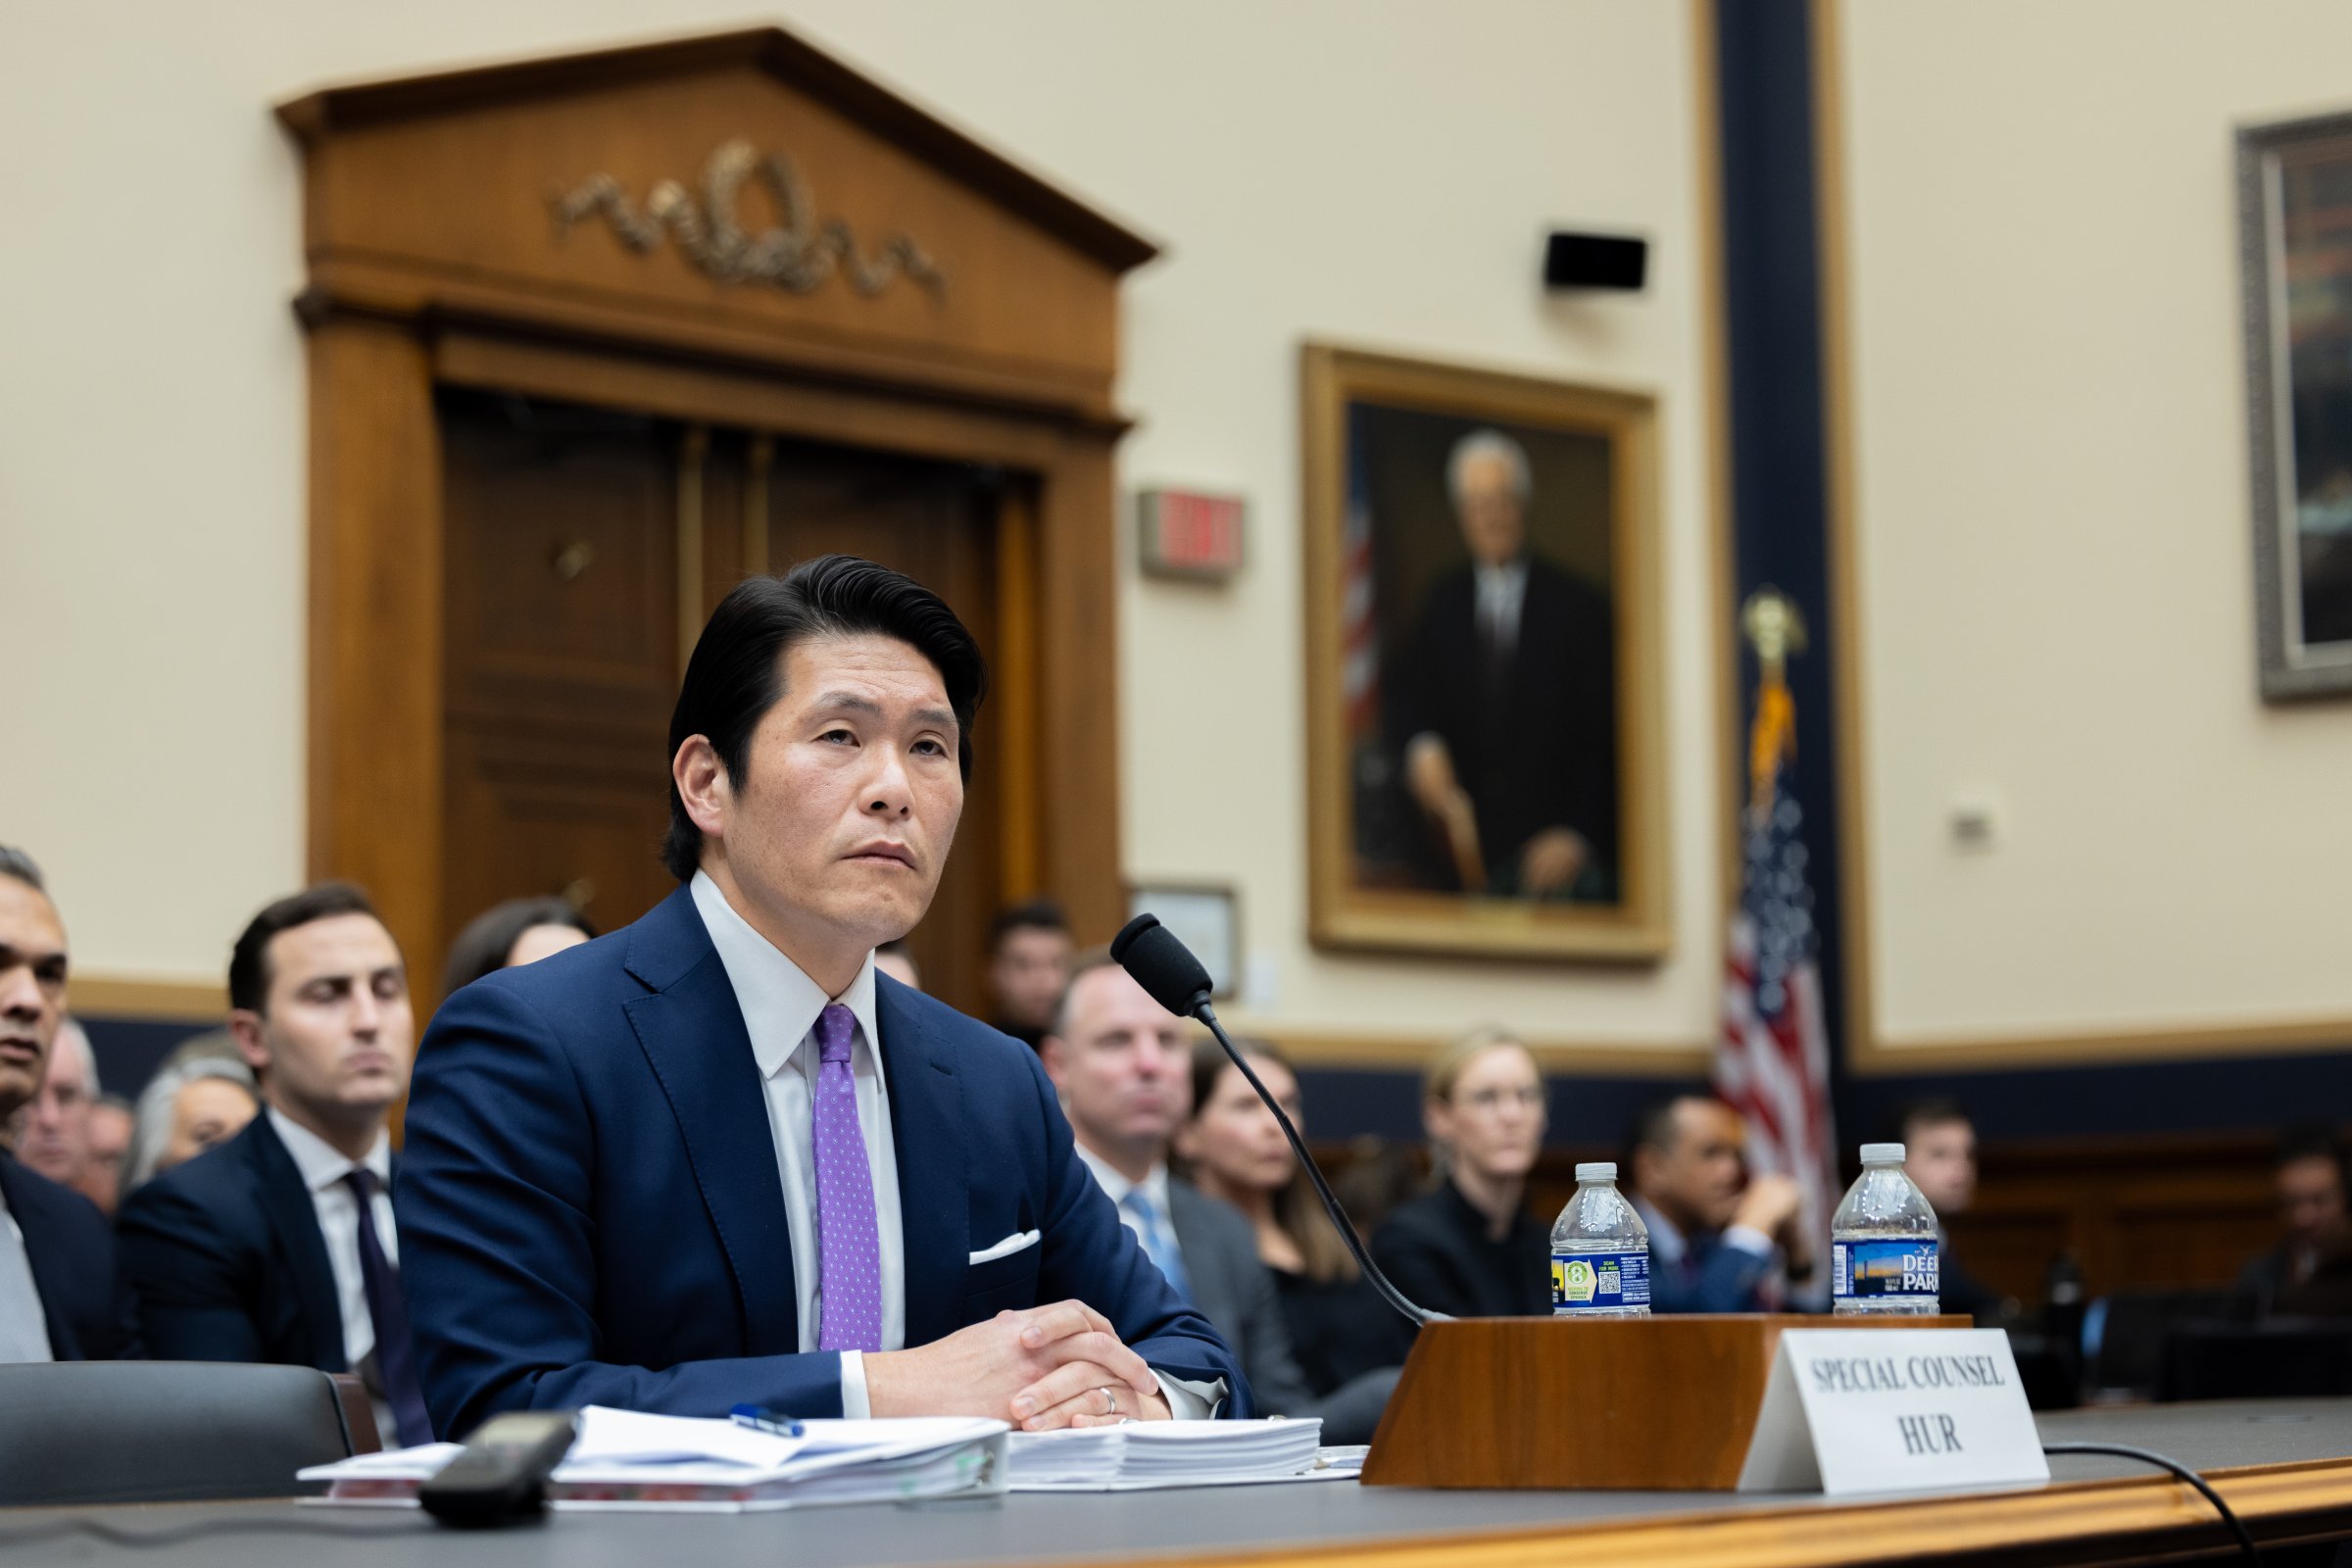 Special Counsel Robert Hur testifies at a House Judiciary Committee